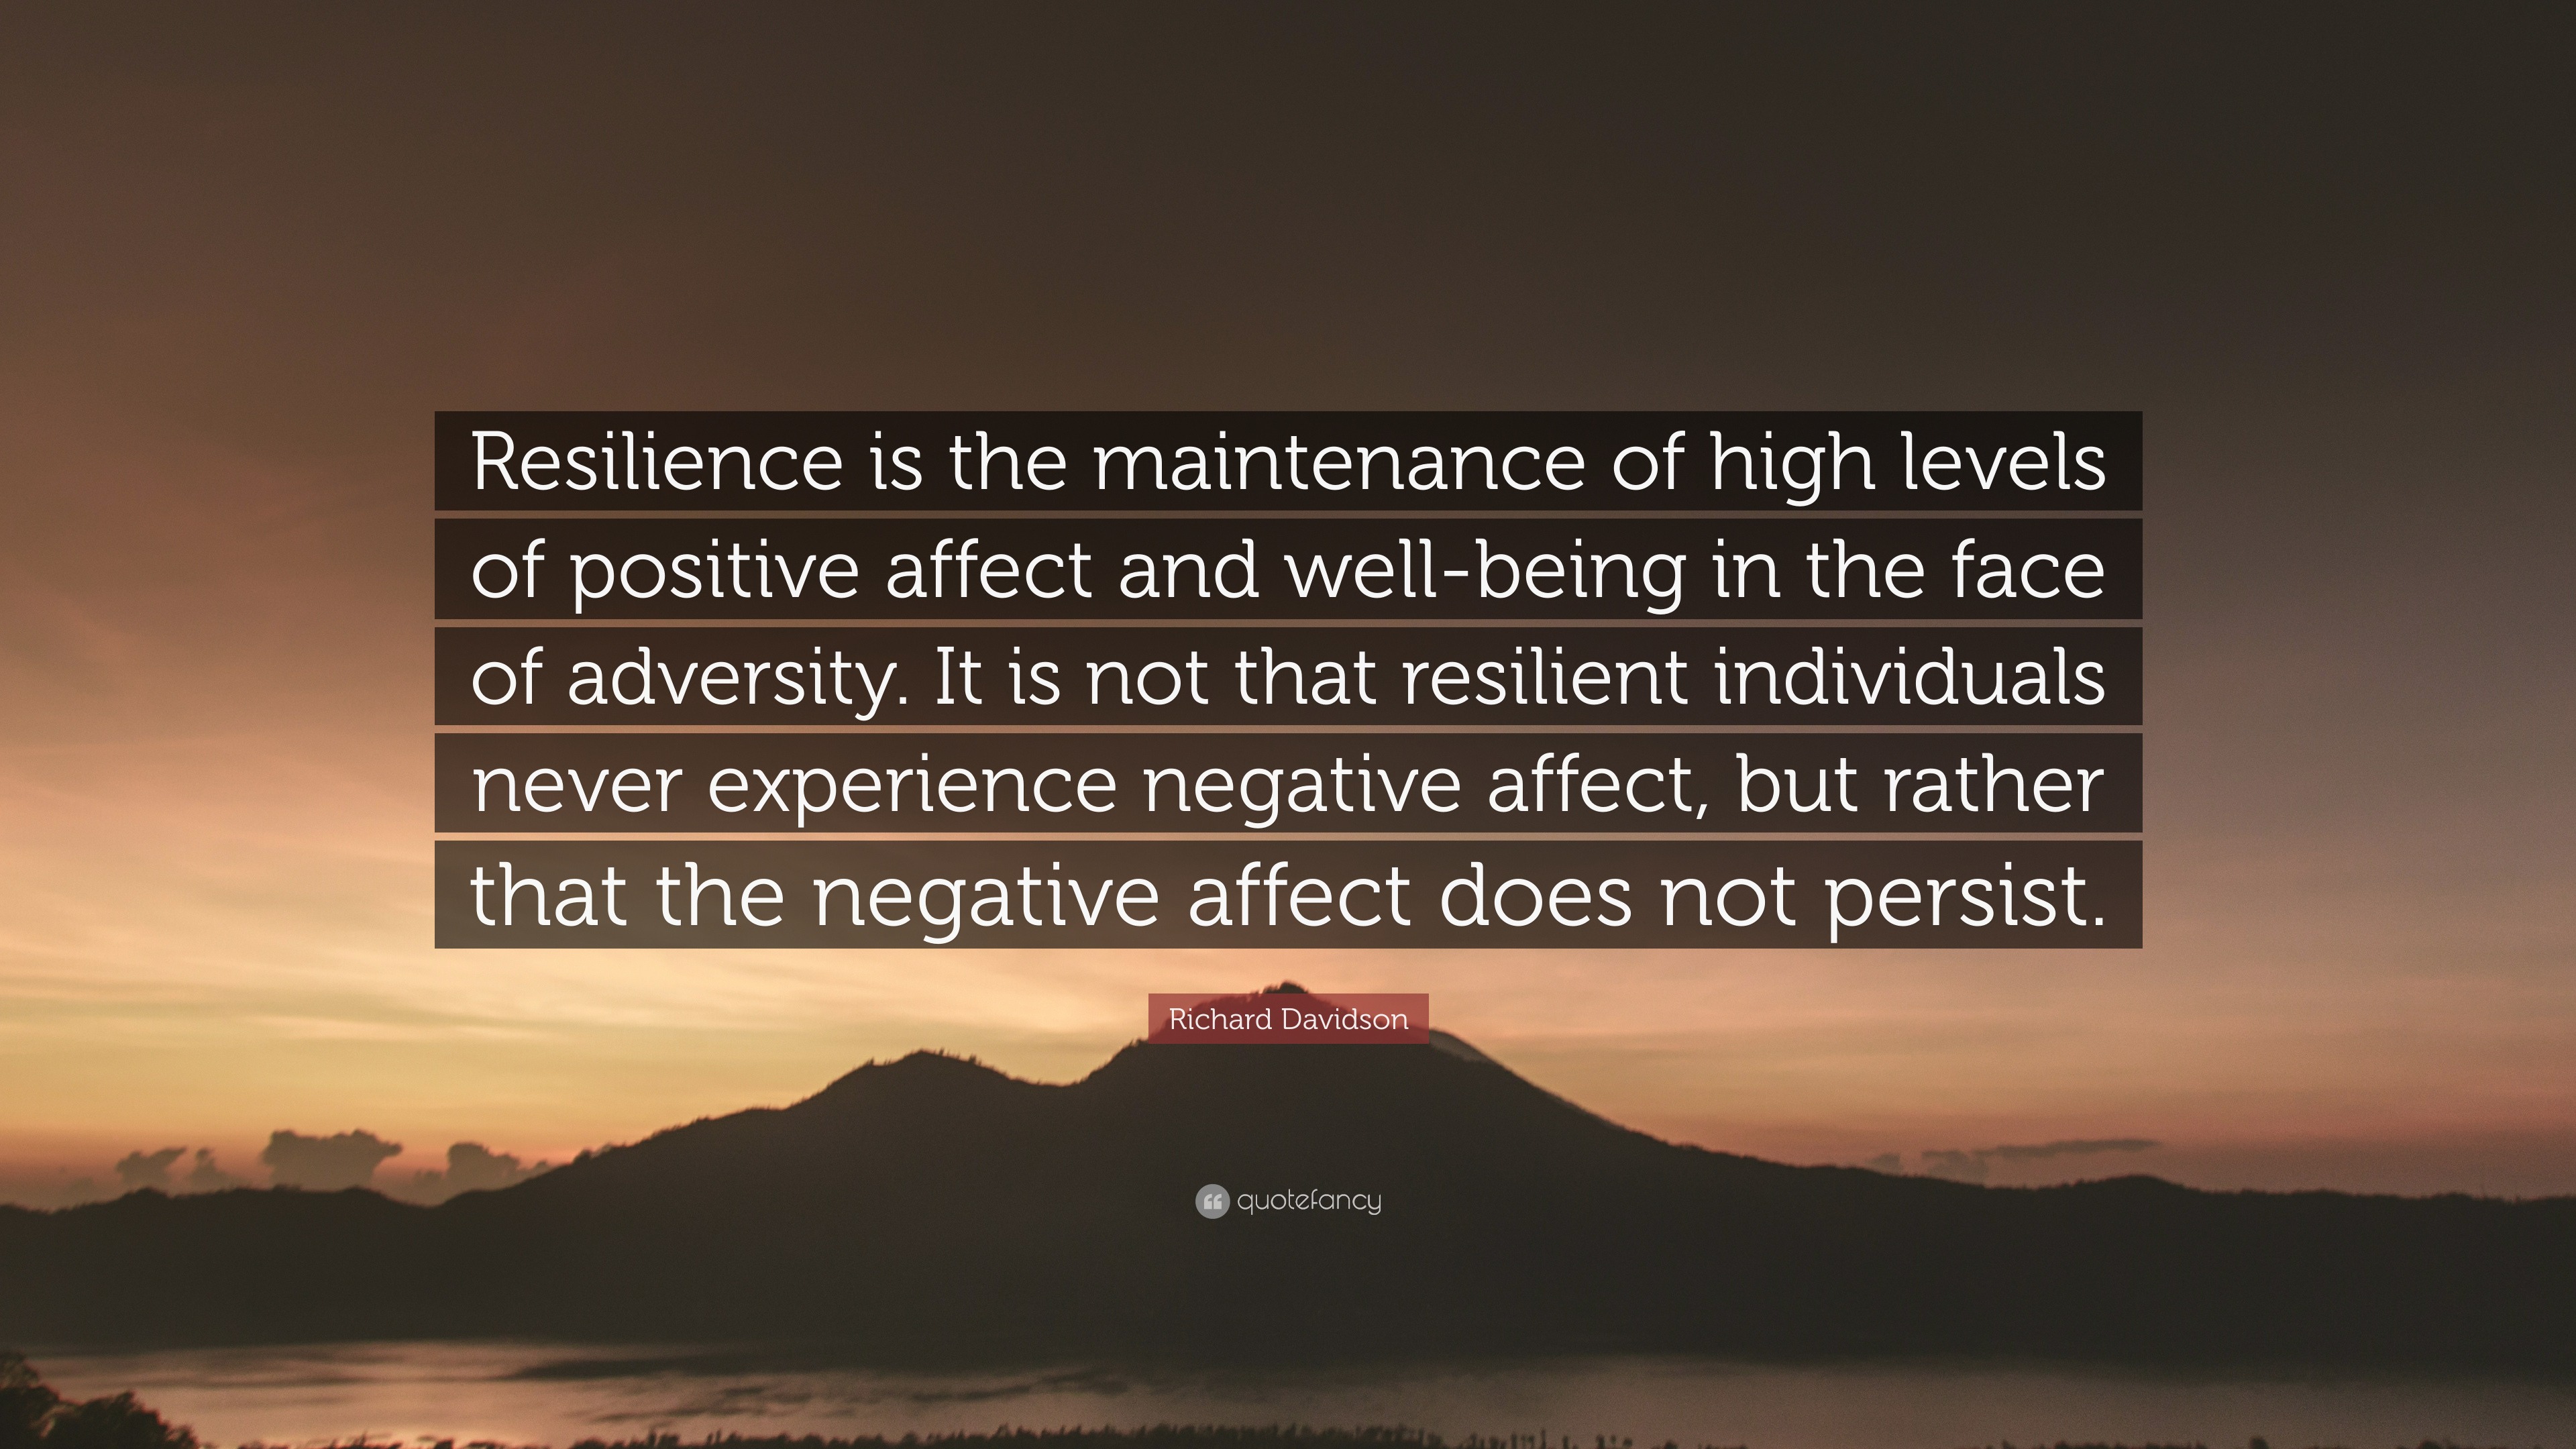 Richard Davidson Quote: “Resilience is the maintenance of high levels ...